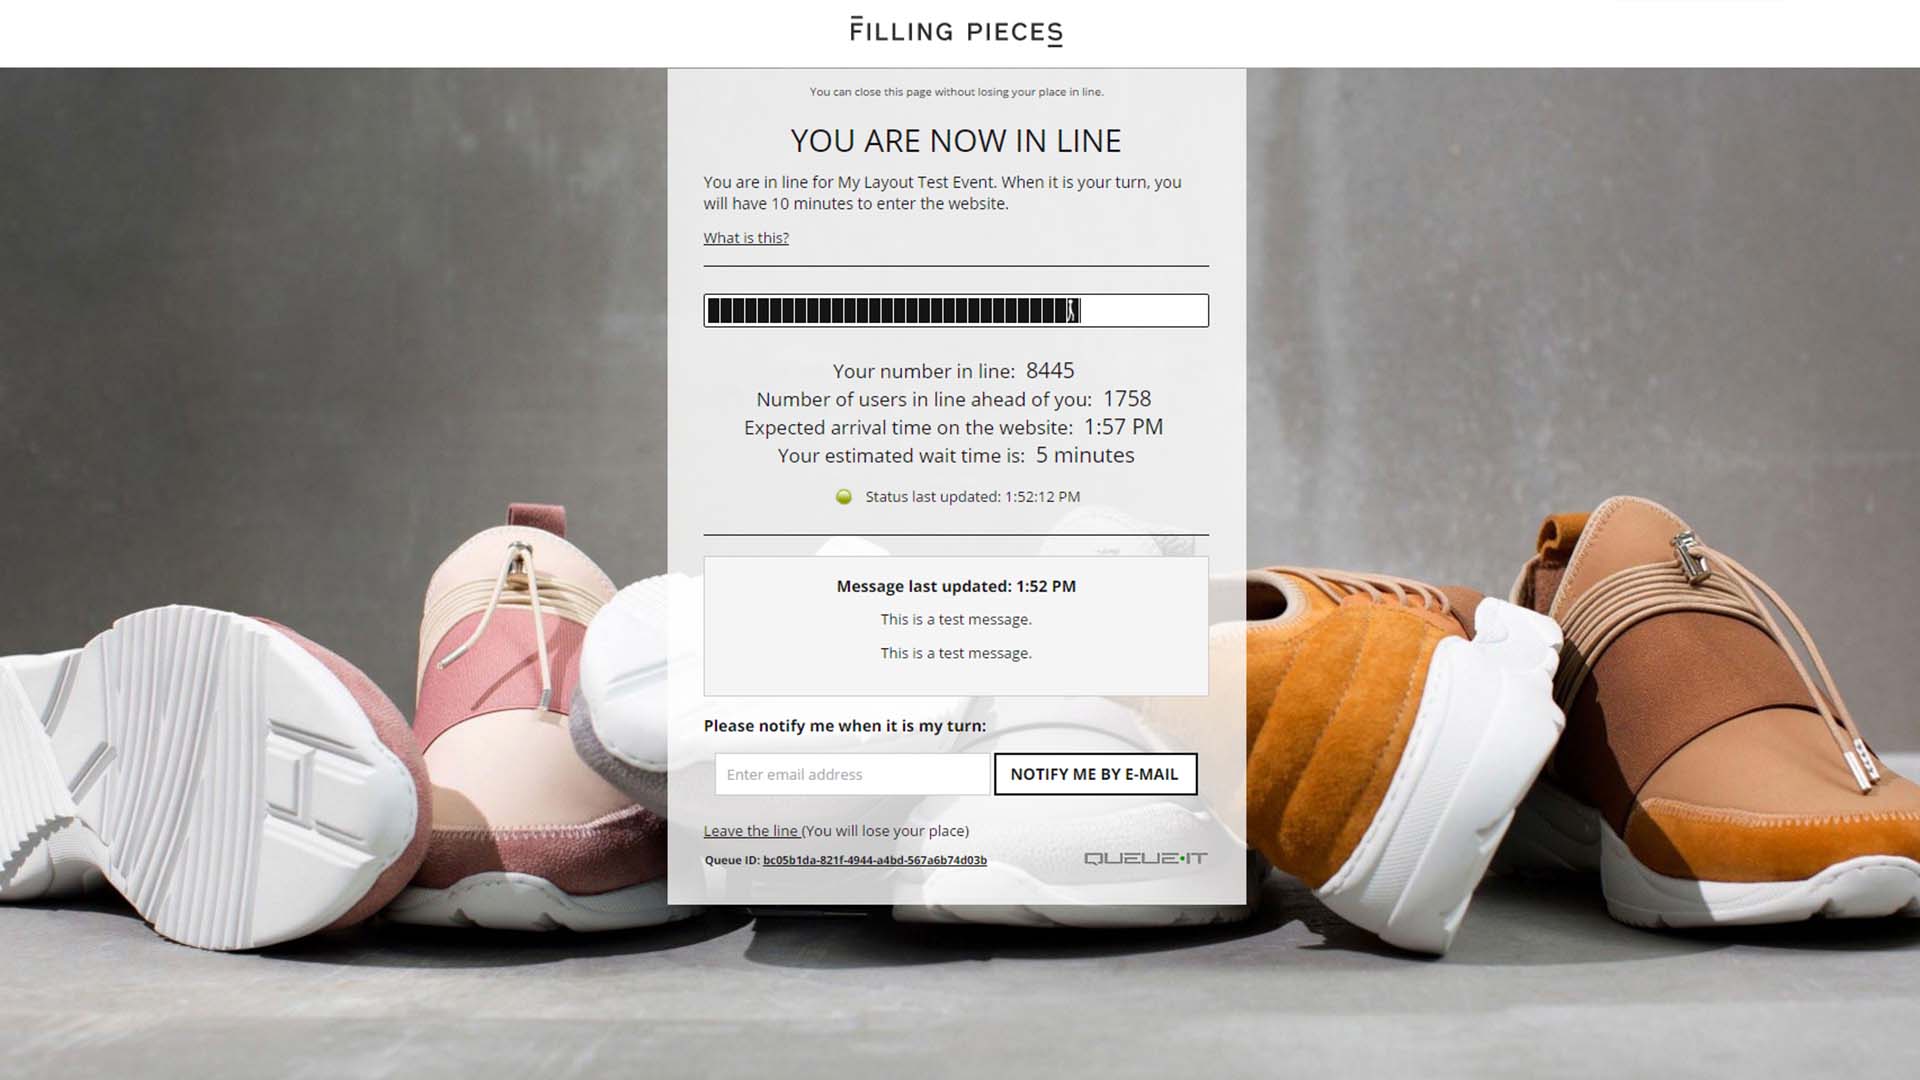 Filling Pieces queue page shows line numbers crucial to activate the bandwagon effect